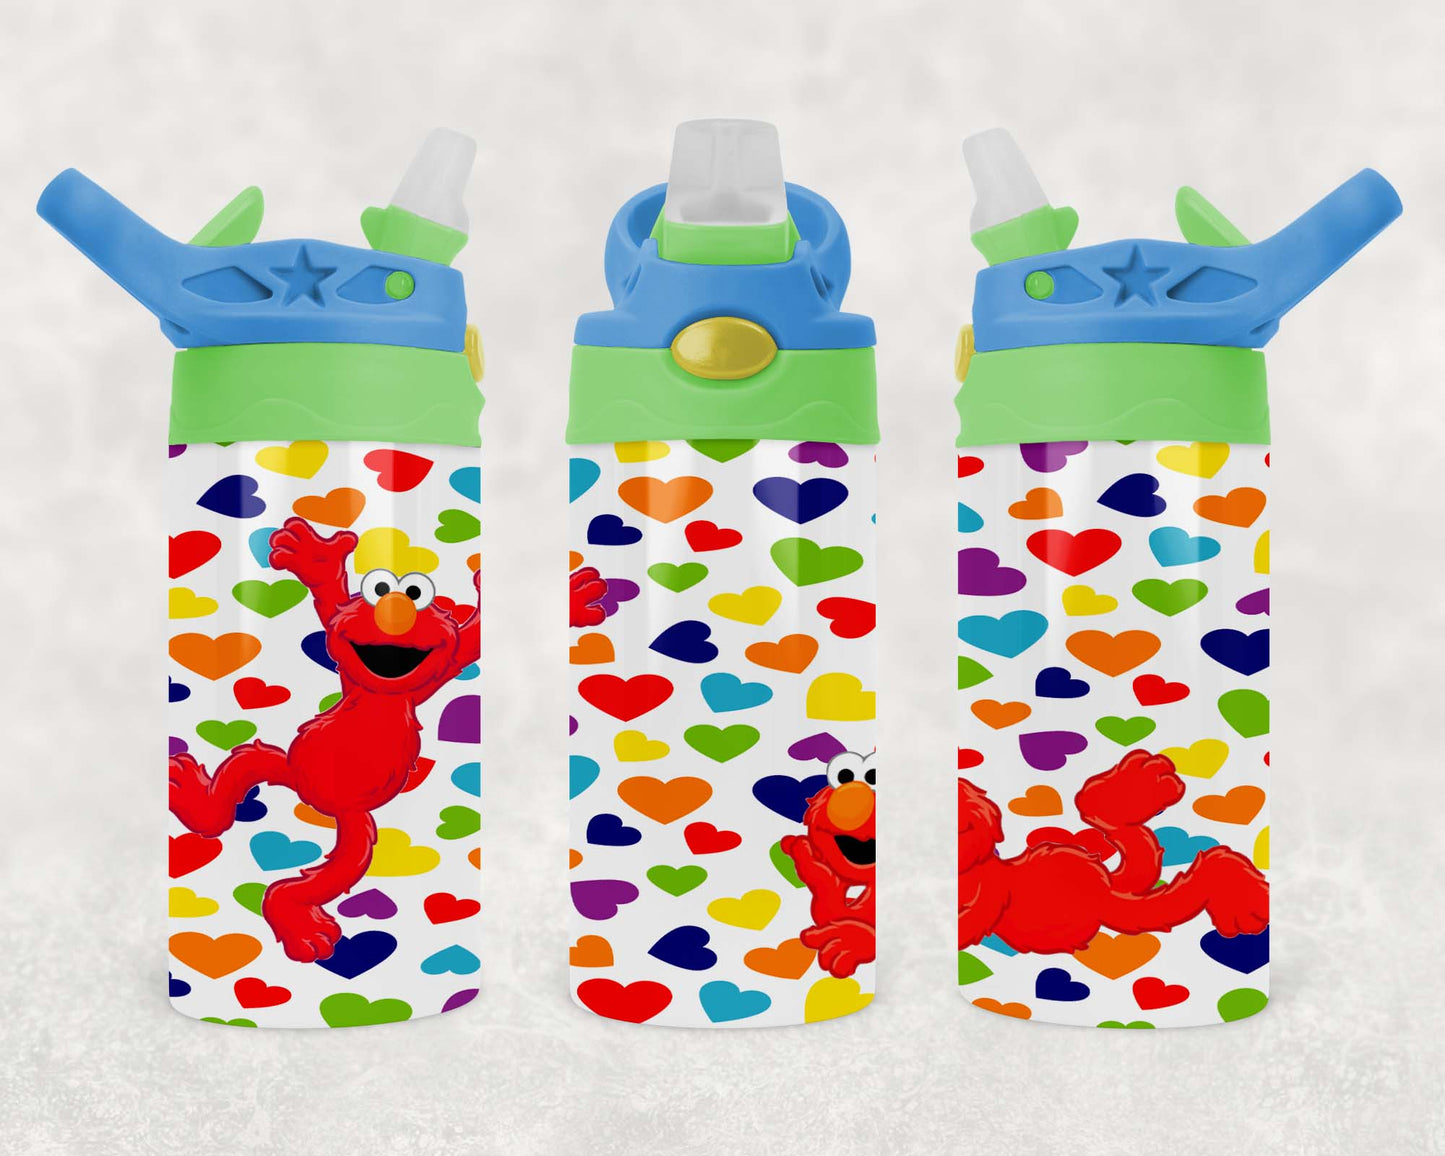 Best Stainless Steel Water Bottle For Toddlers